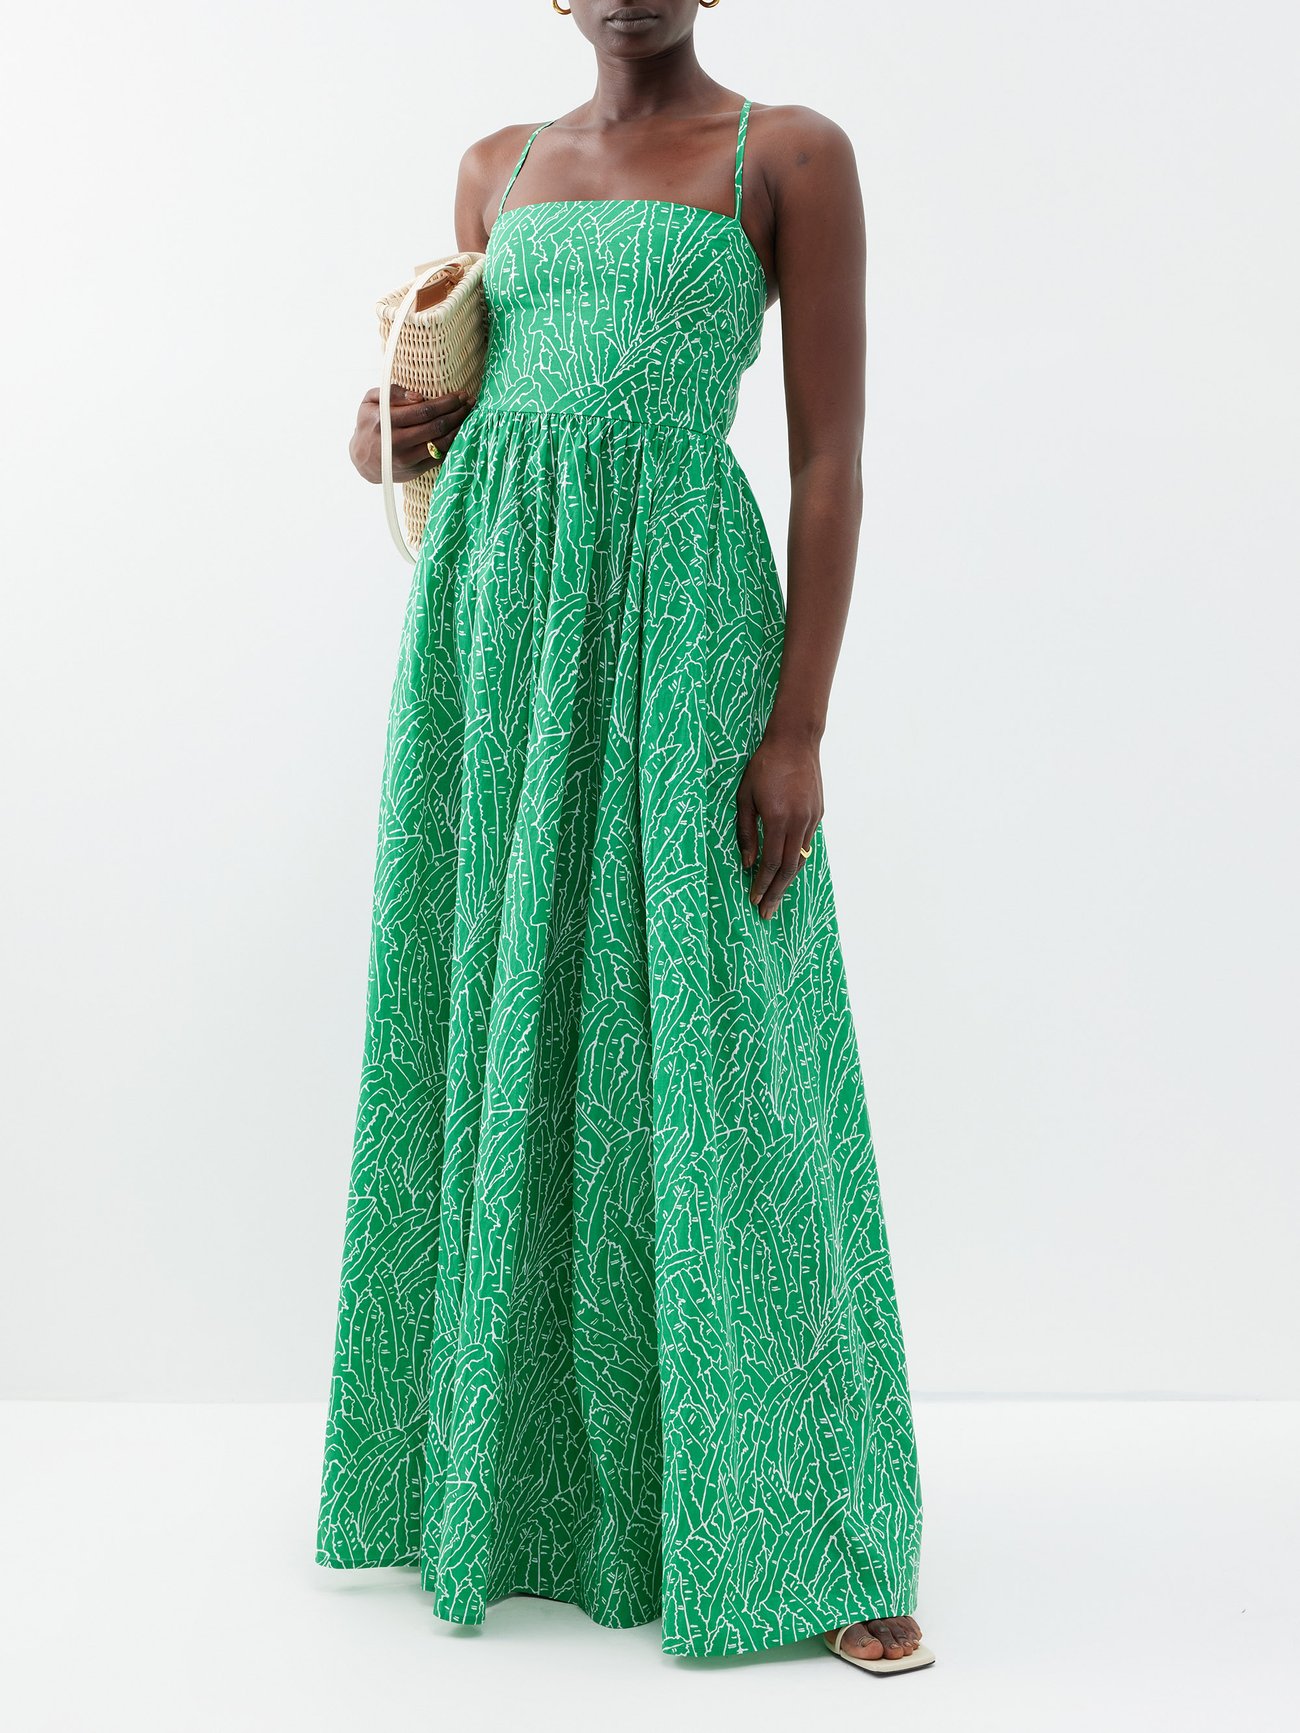 Dyed a verdant shade of green, Staud's square-neck cotton Courtney maxi dress is saturated with a warm weather-inspired palm leaf print.